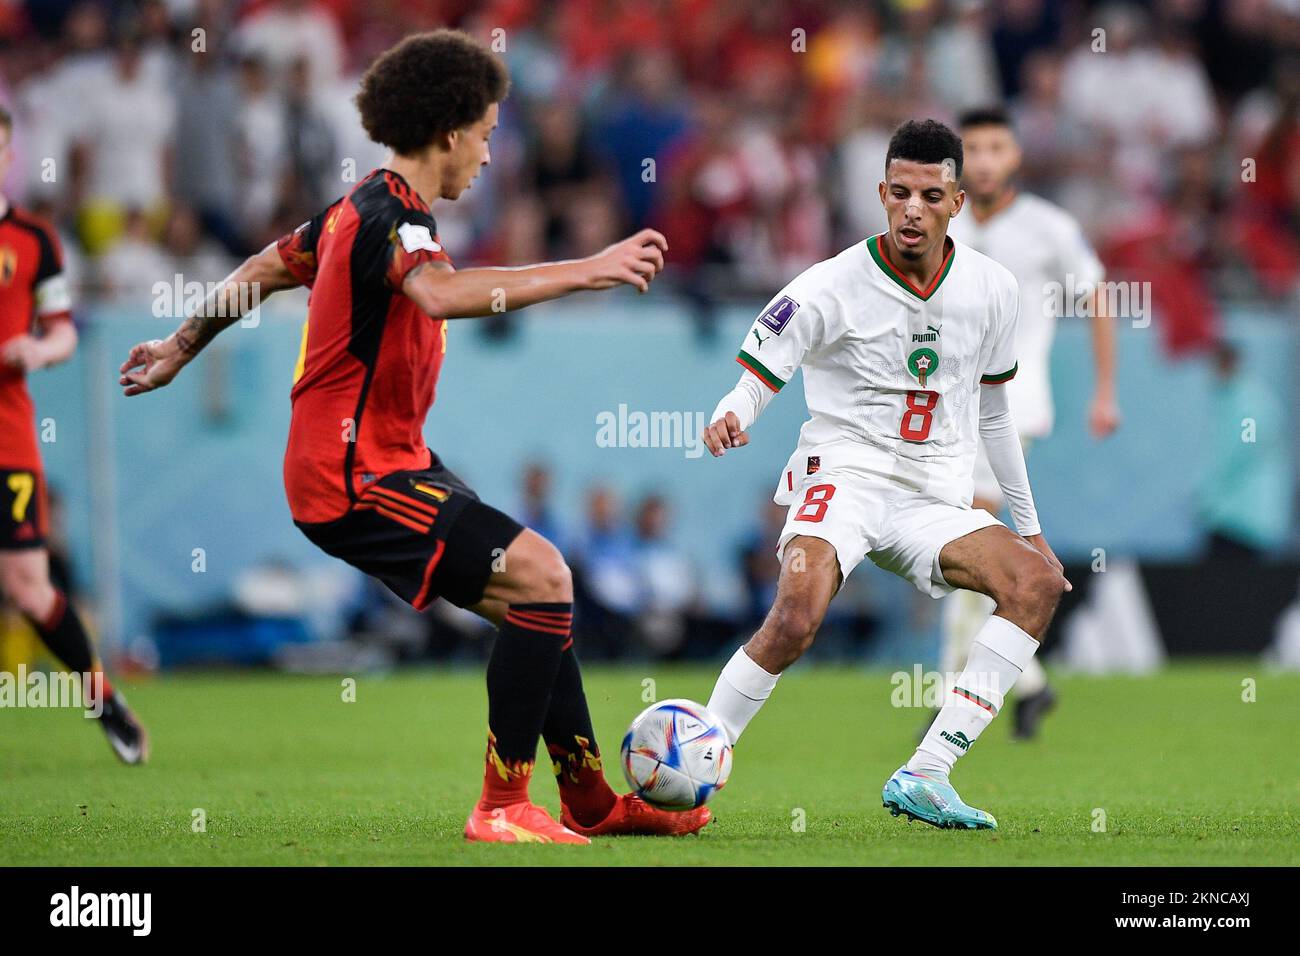 DOHA, QATAR - NOVEMBER 27: Axel Witsel of Belgium battles for the ball with Azzedine Ounahi of Morocco during the Group F - FIFA World Cup Qatar 2022 match between Belgium and Morocco at the Al Thumama Stadium on November 27, 2022 in Doha, Qatar (Photo by Pablo Morano/BSR Agency) Stock Photo